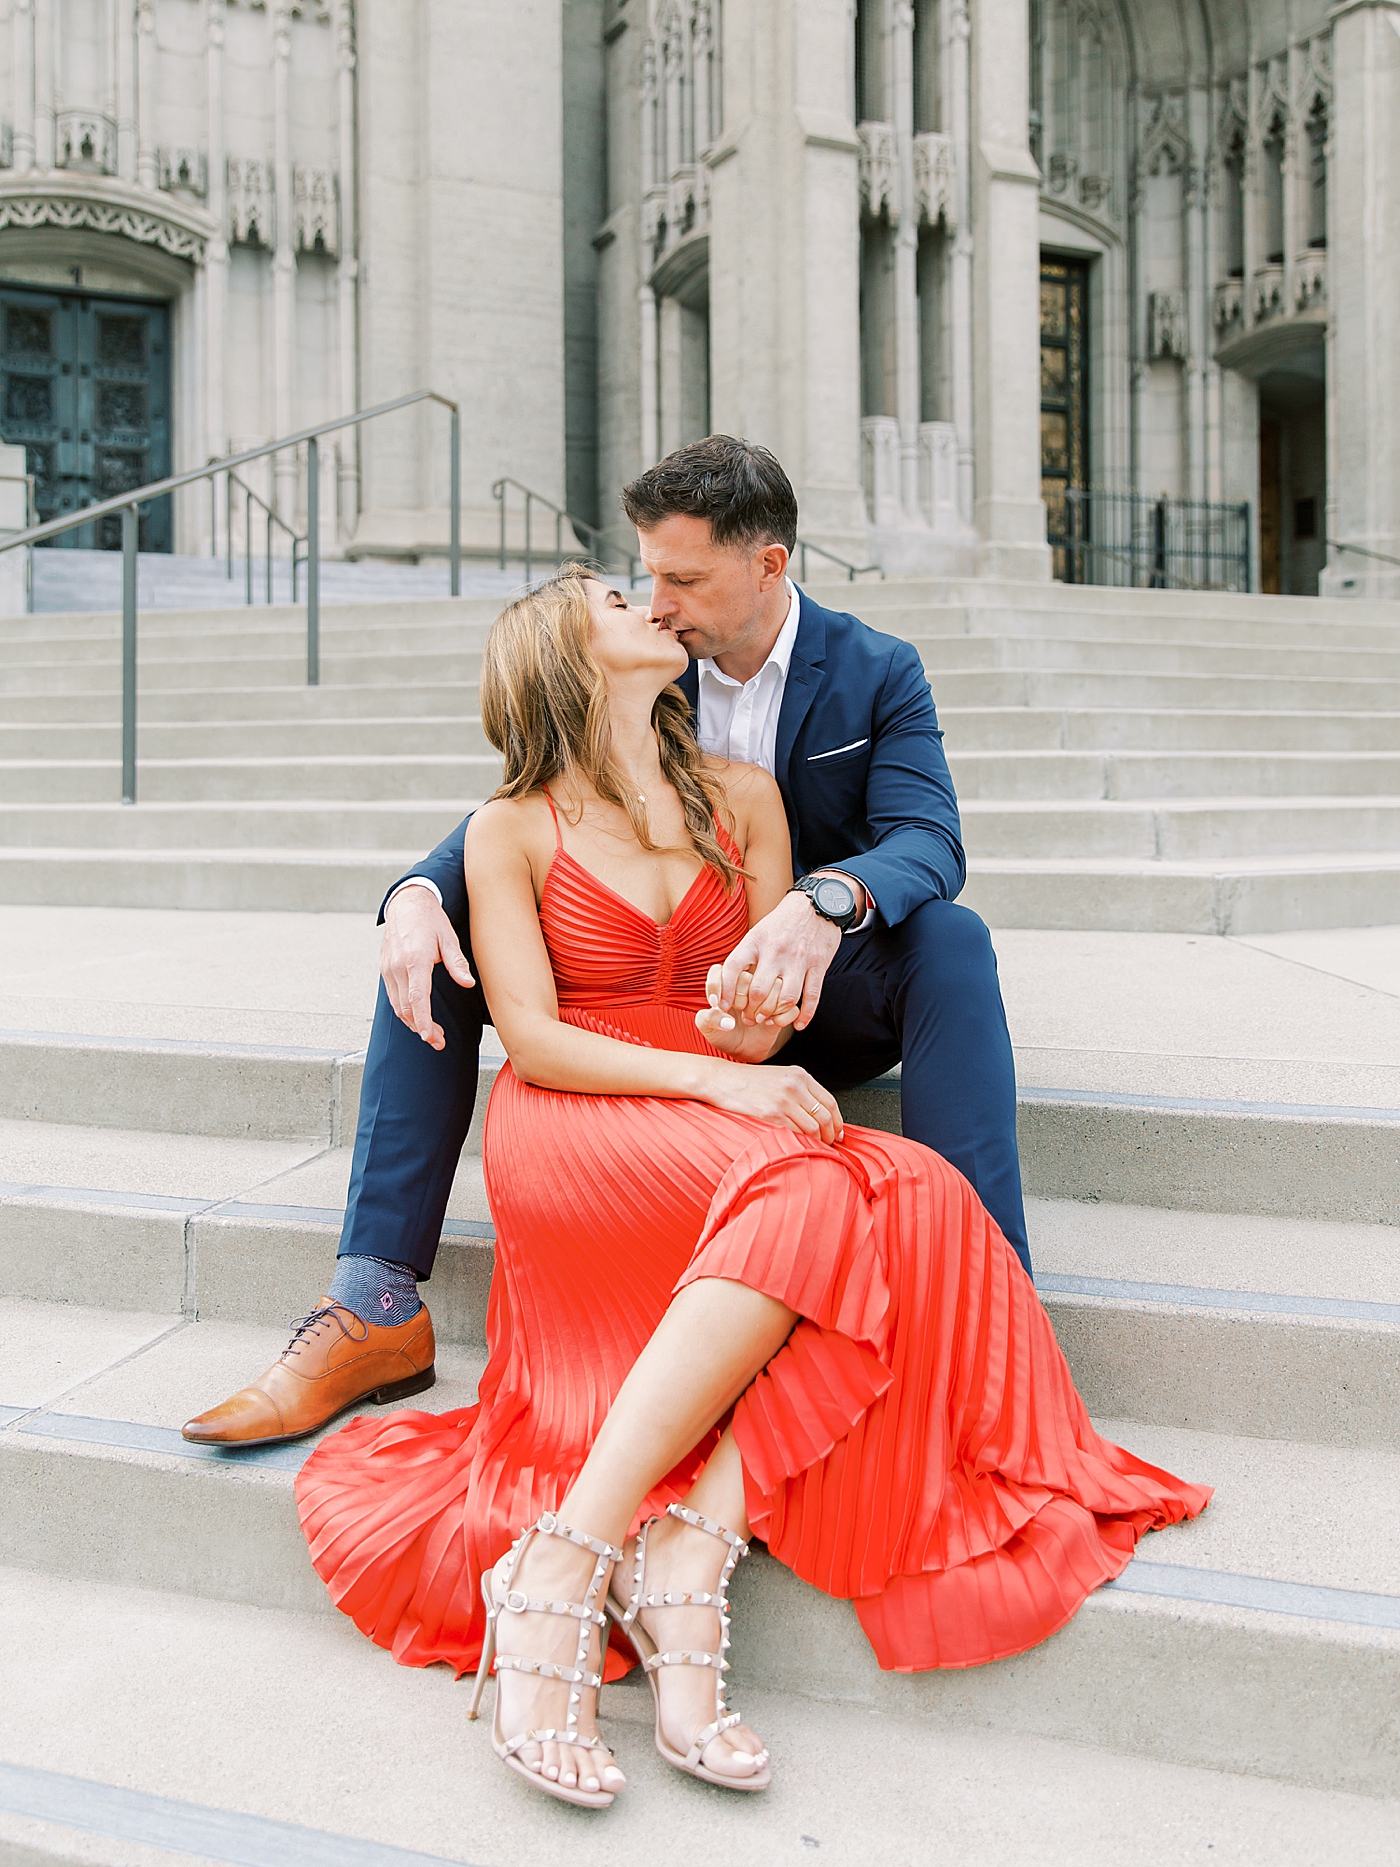 Woman in red dress kissing her fiancé | Photo by Diane Sotero